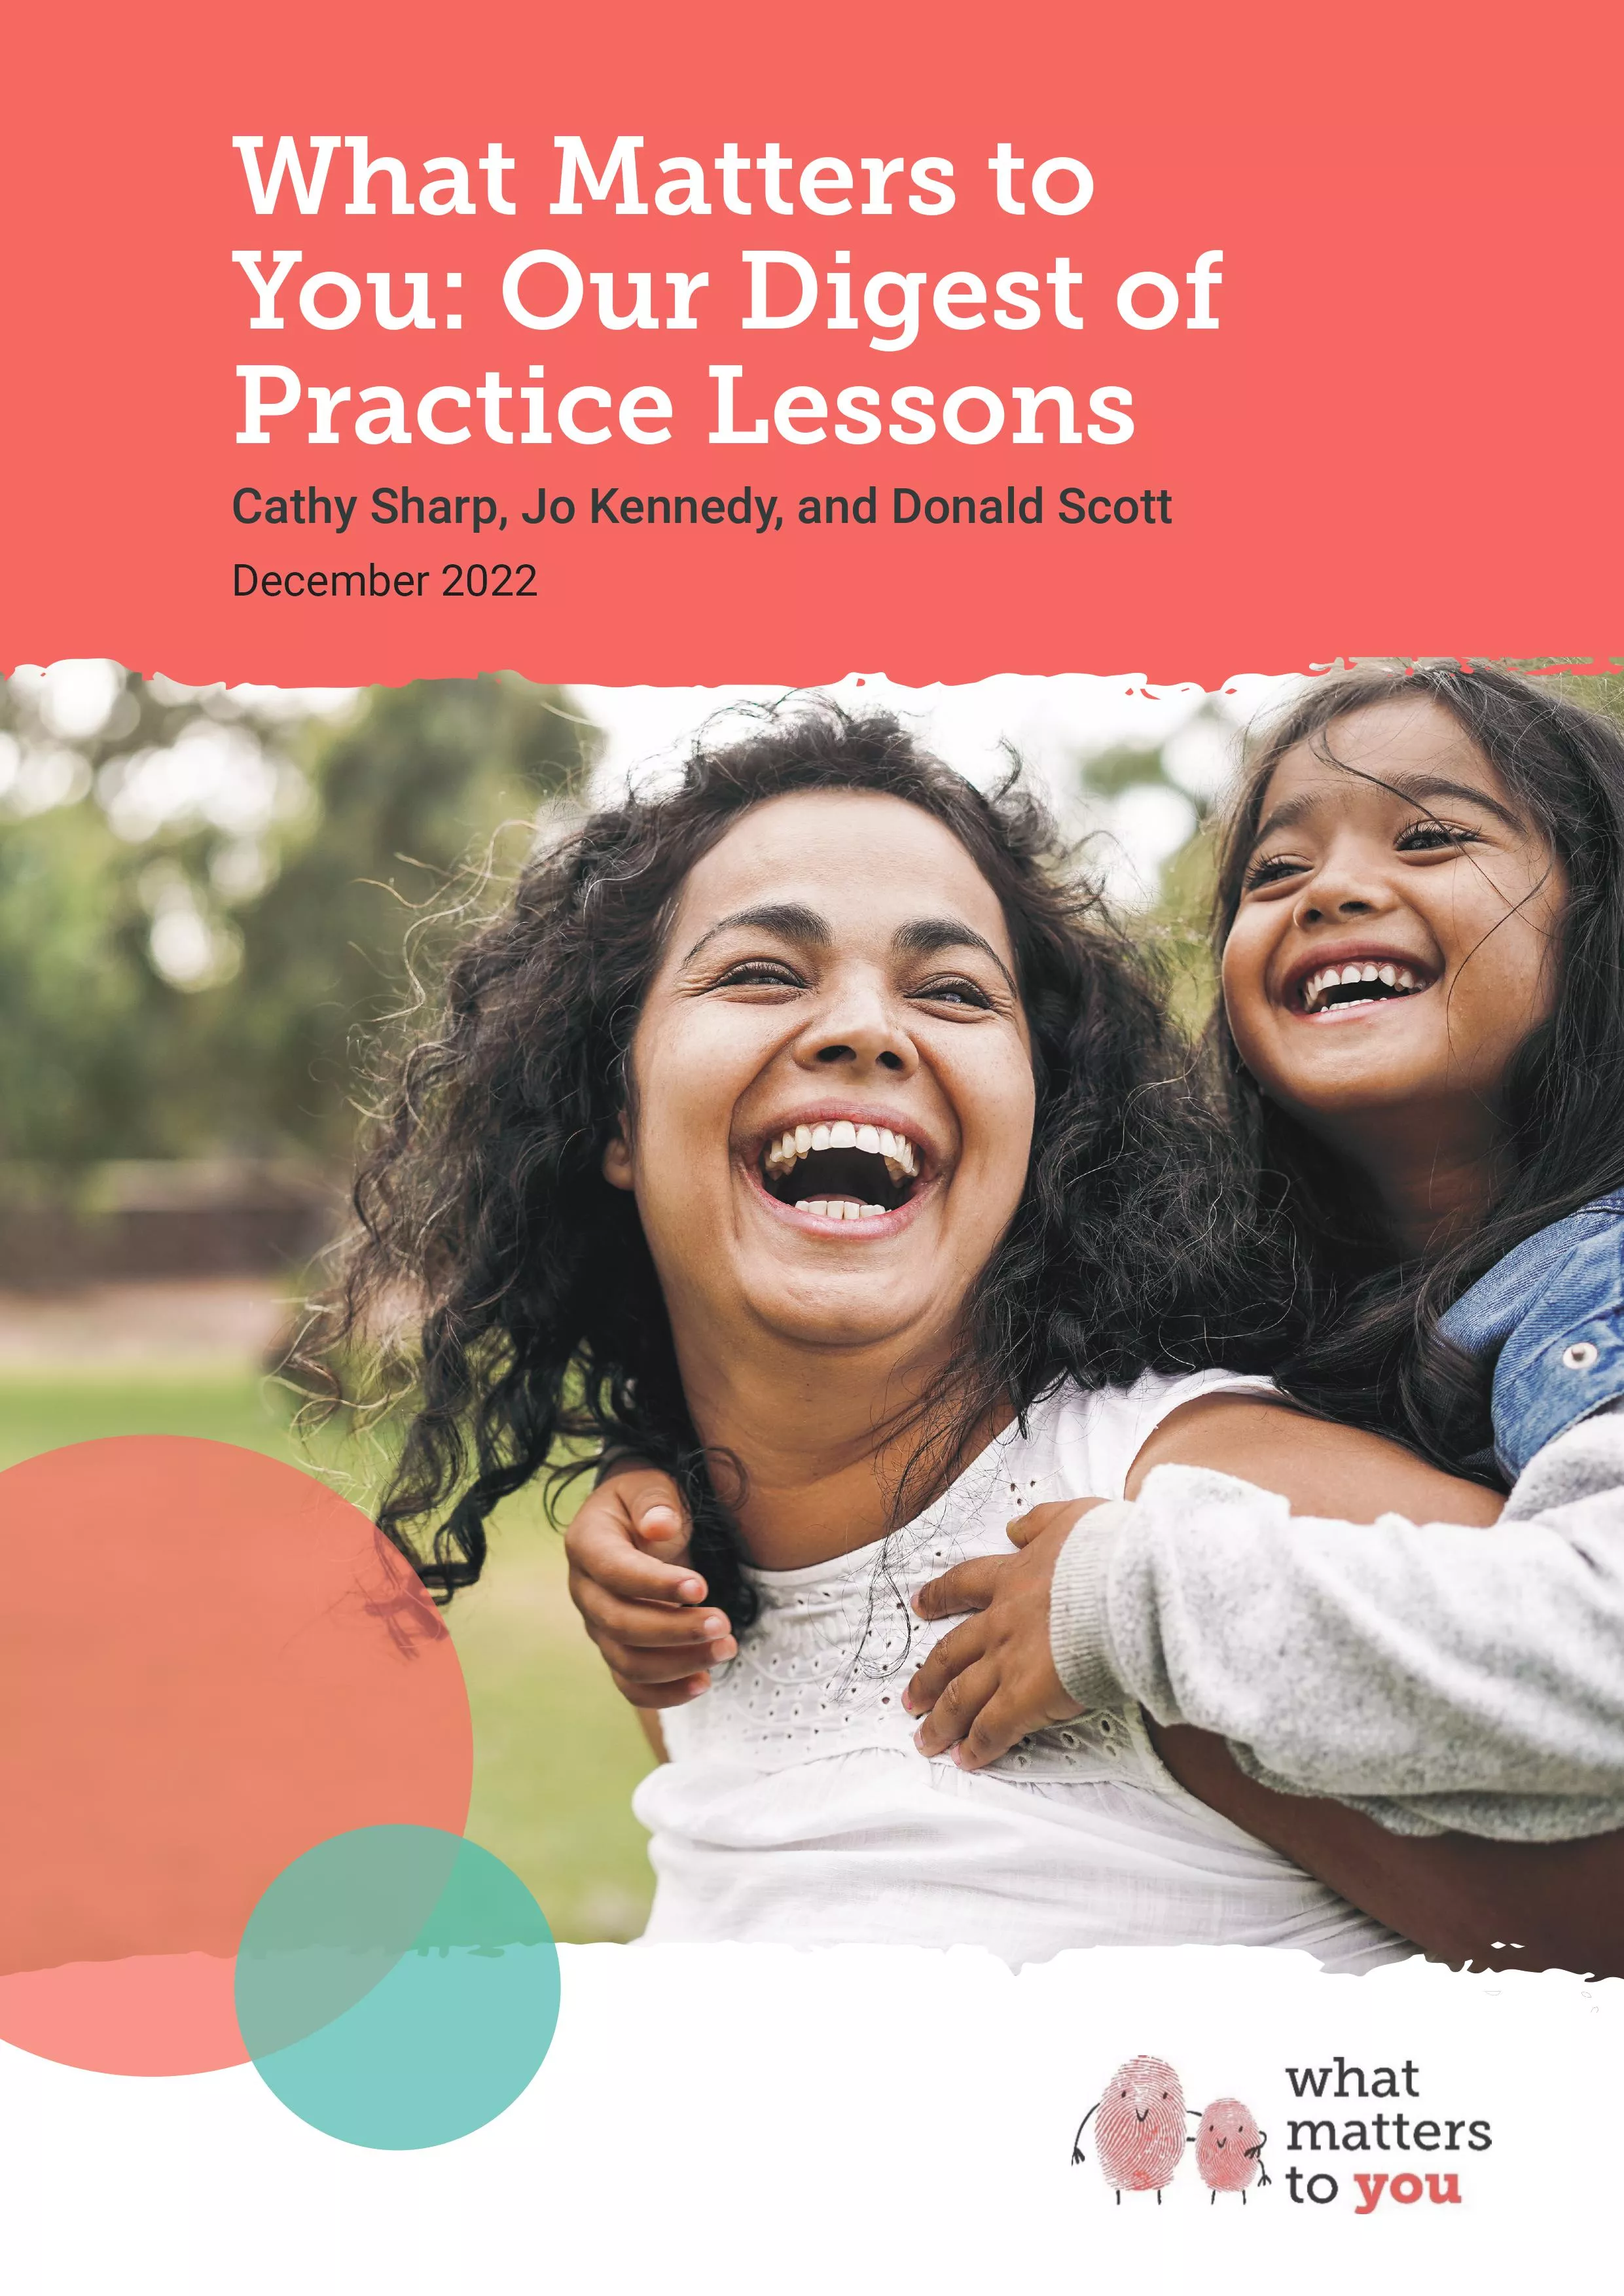 Our Digest of Practice Lessons